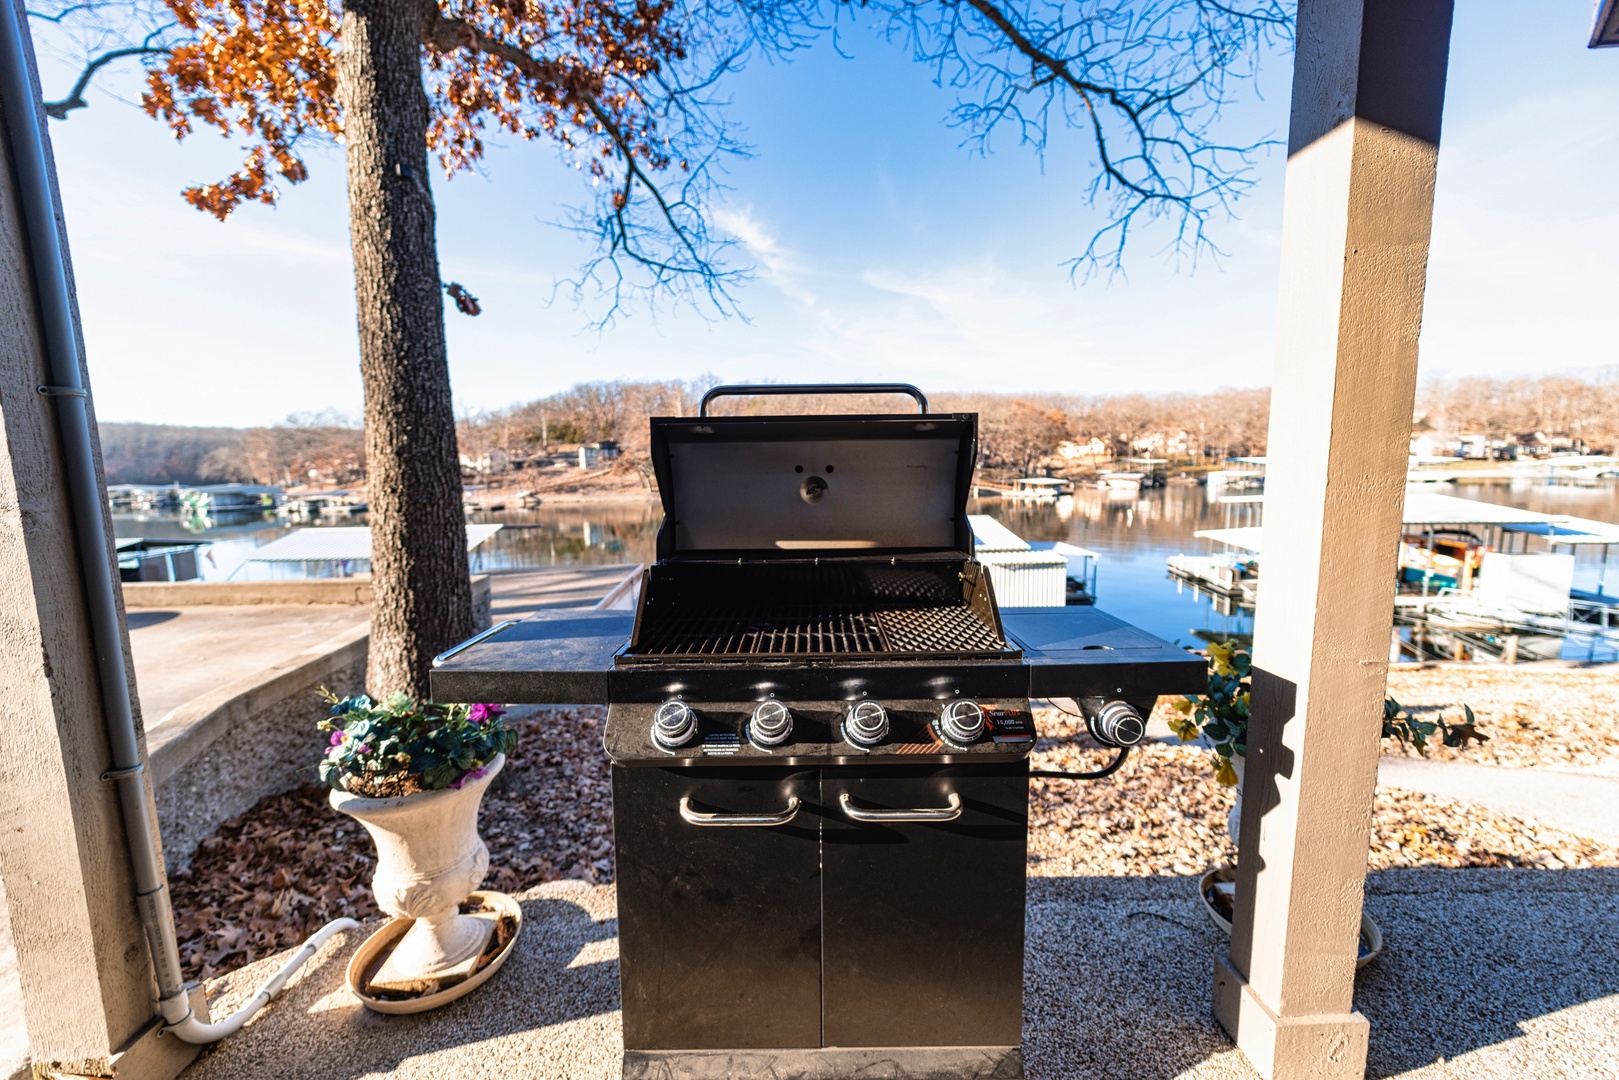 Relax in the fresh air while you grill up a feast!